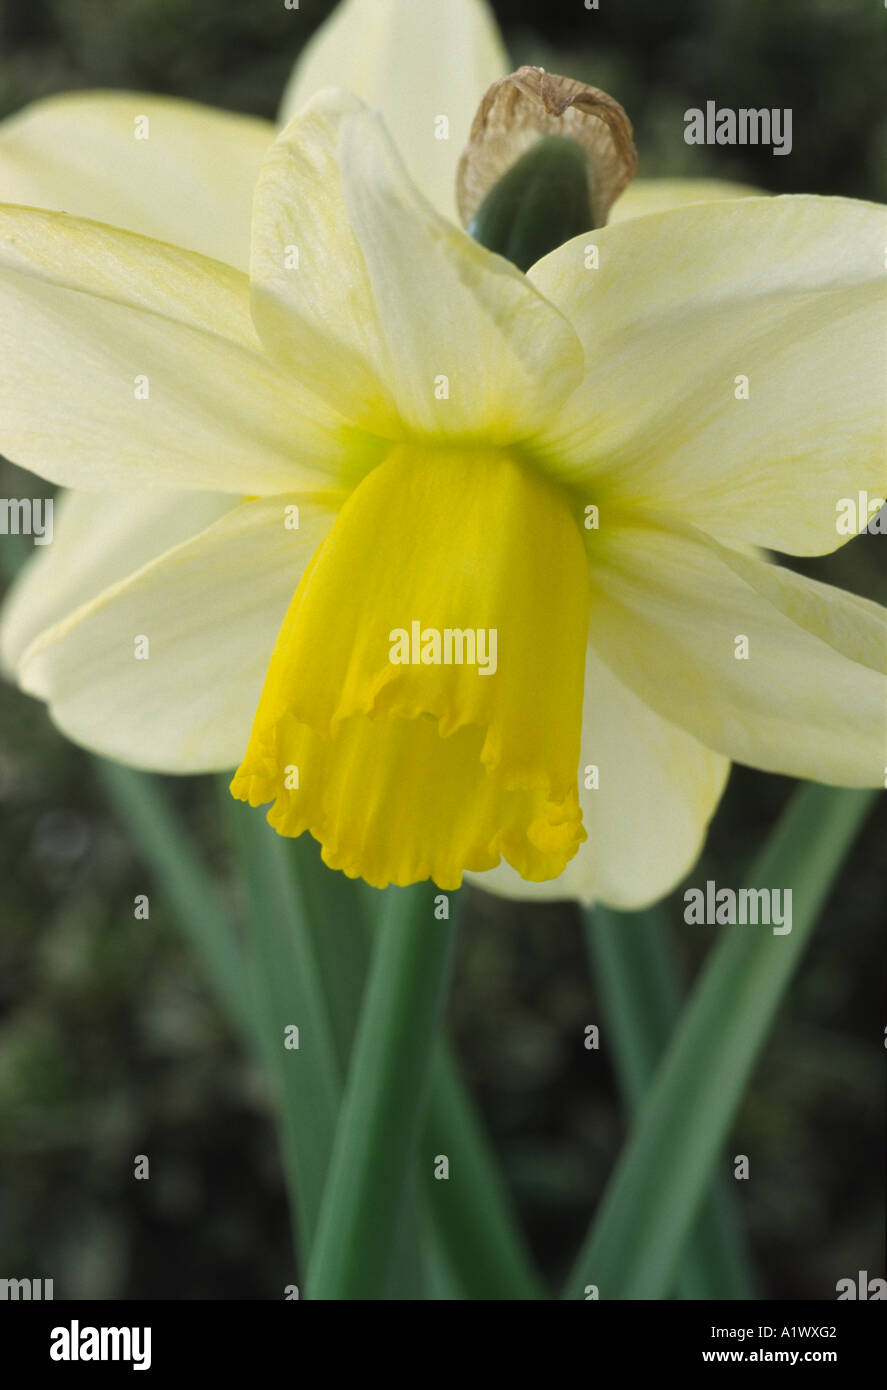 Narcissus 'Greenlet'. Division six 6 Cyclamineus Daffodil. Stock Photo